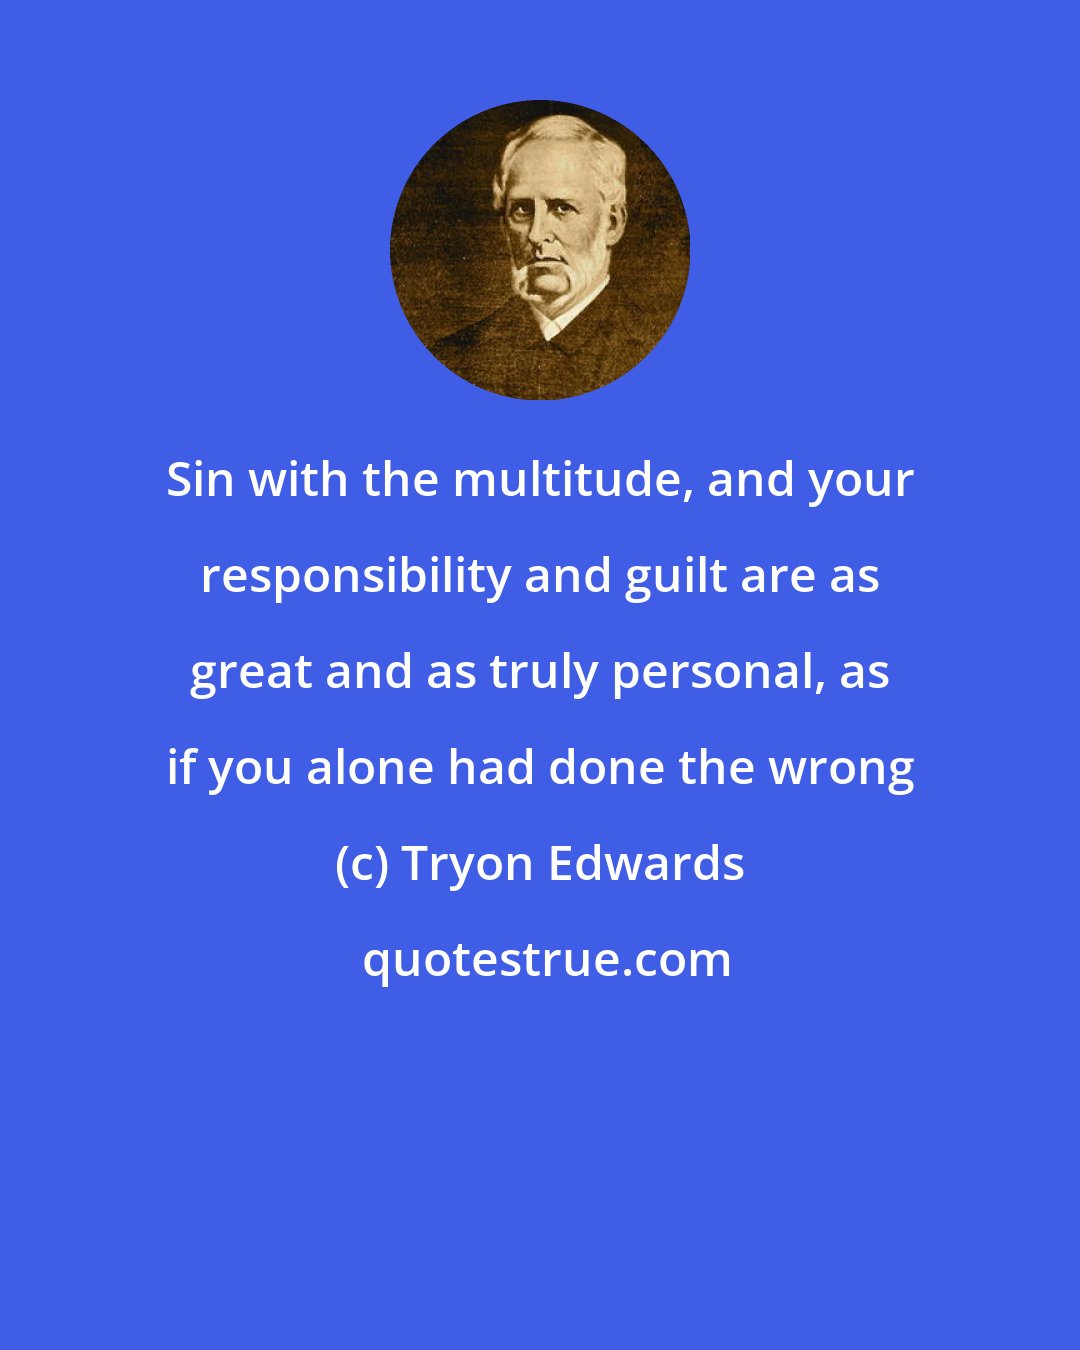 Tryon Edwards: Sin with the multitude, and your responsibility and guilt are as great and as truly personal, as if you alone had done the wrong